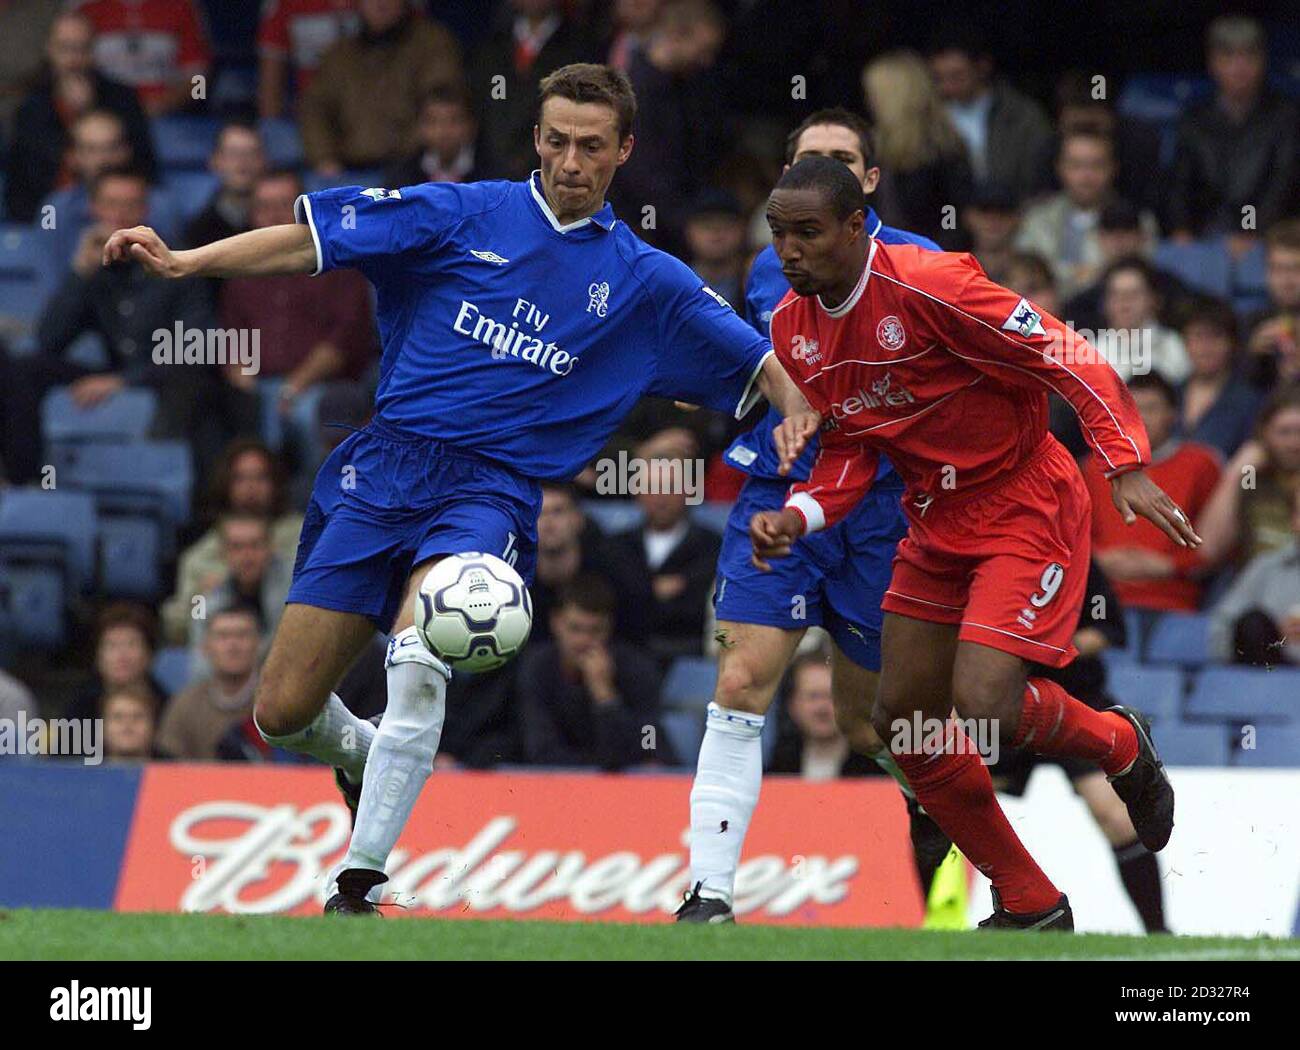 Chelsea's Slavisa Jokanovic clears the ball away from Middlesbrough's Paul Ince during the FA Barclaycard Premiership match at Stamford Bridge, London. THIS PICTURE CAN ONLY BE USED WITHIN THE CONTEXT OF AN EDITORIAL FEATURE. NO WEBSITE/INTERNET USE OF PREMIERSHIP MATERIAL UNLESS SITE IS REGISTERED WITH FOOTBALL ASSOCIATION PREMIER LEAGUE Stock Photo